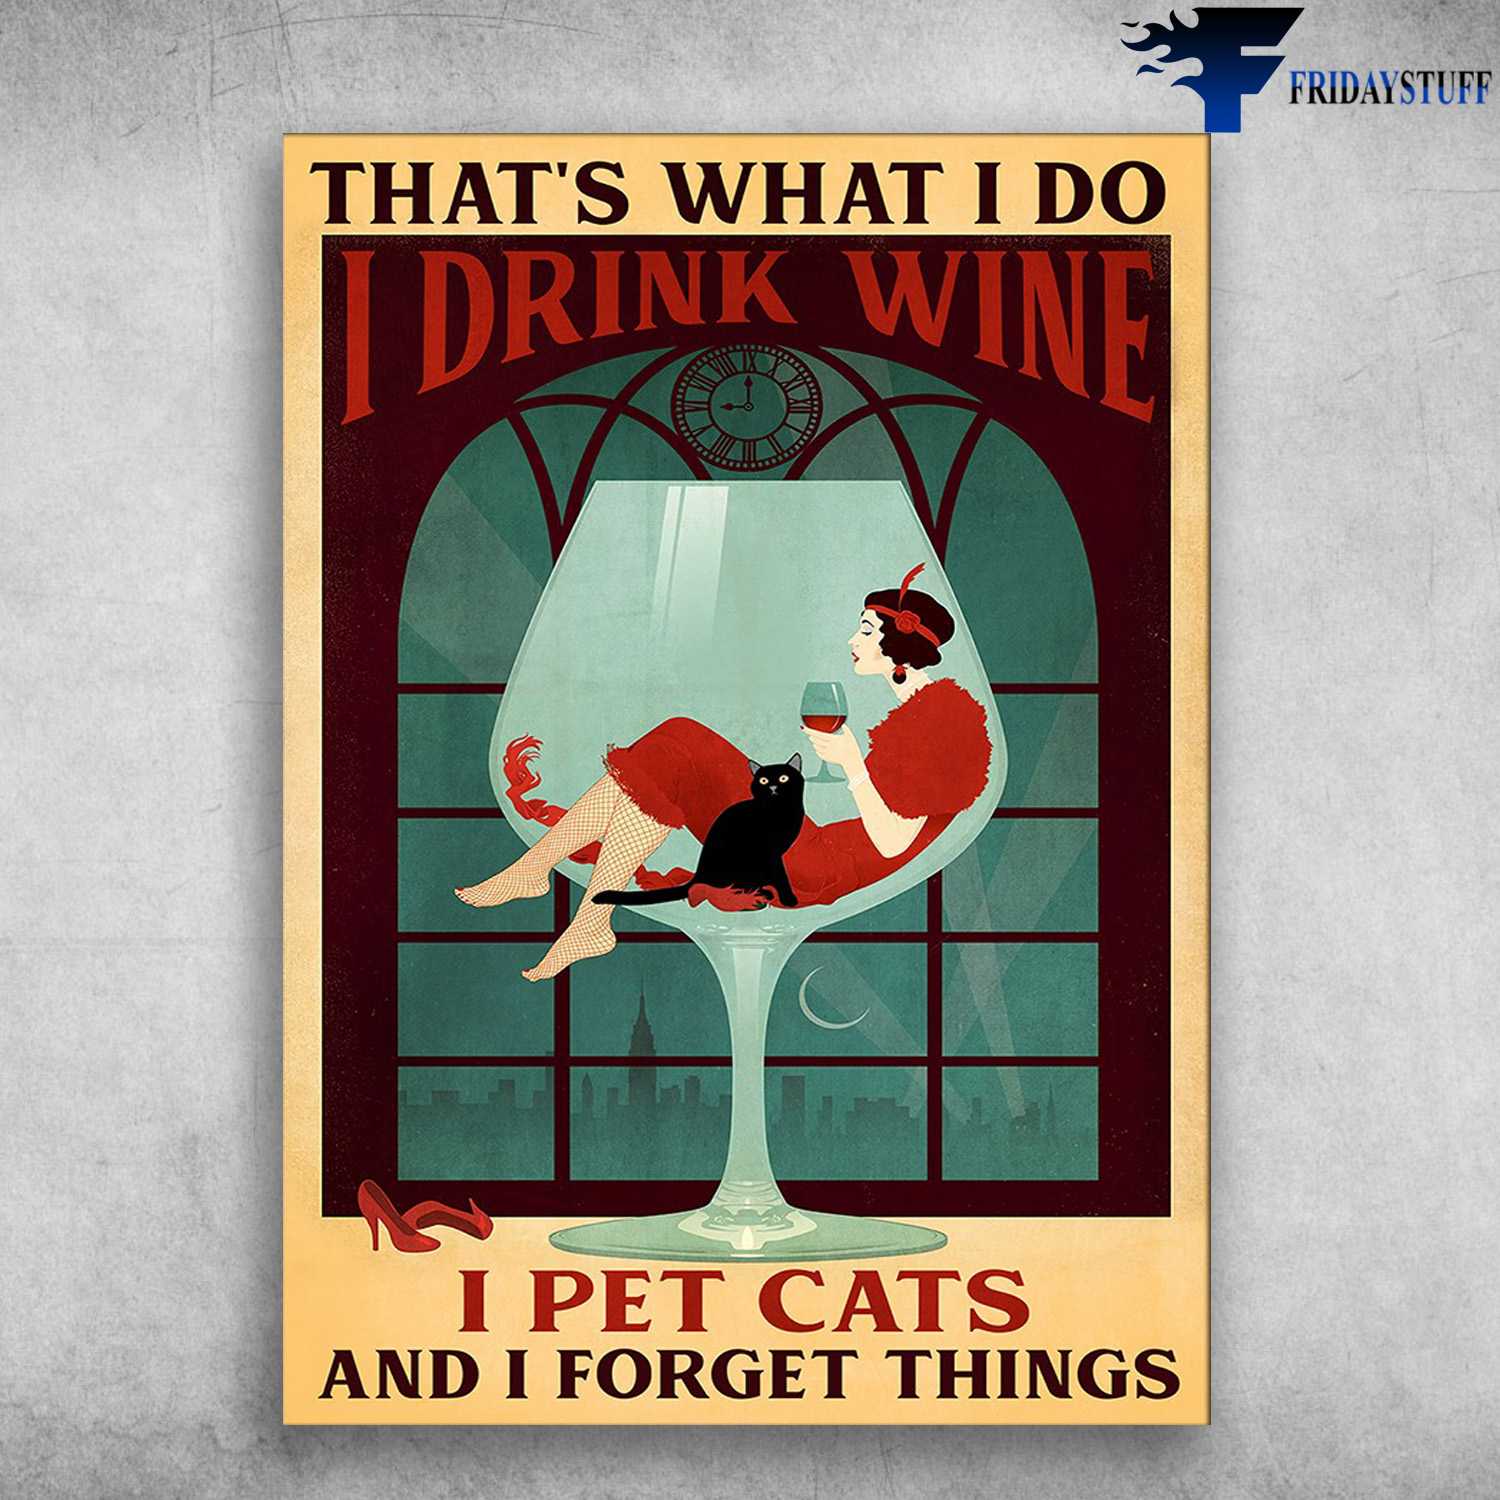 Drink Wine With Cat, Black Cat - That's What I Do, I Drink Wine, I Pet Cats, And I Know Things